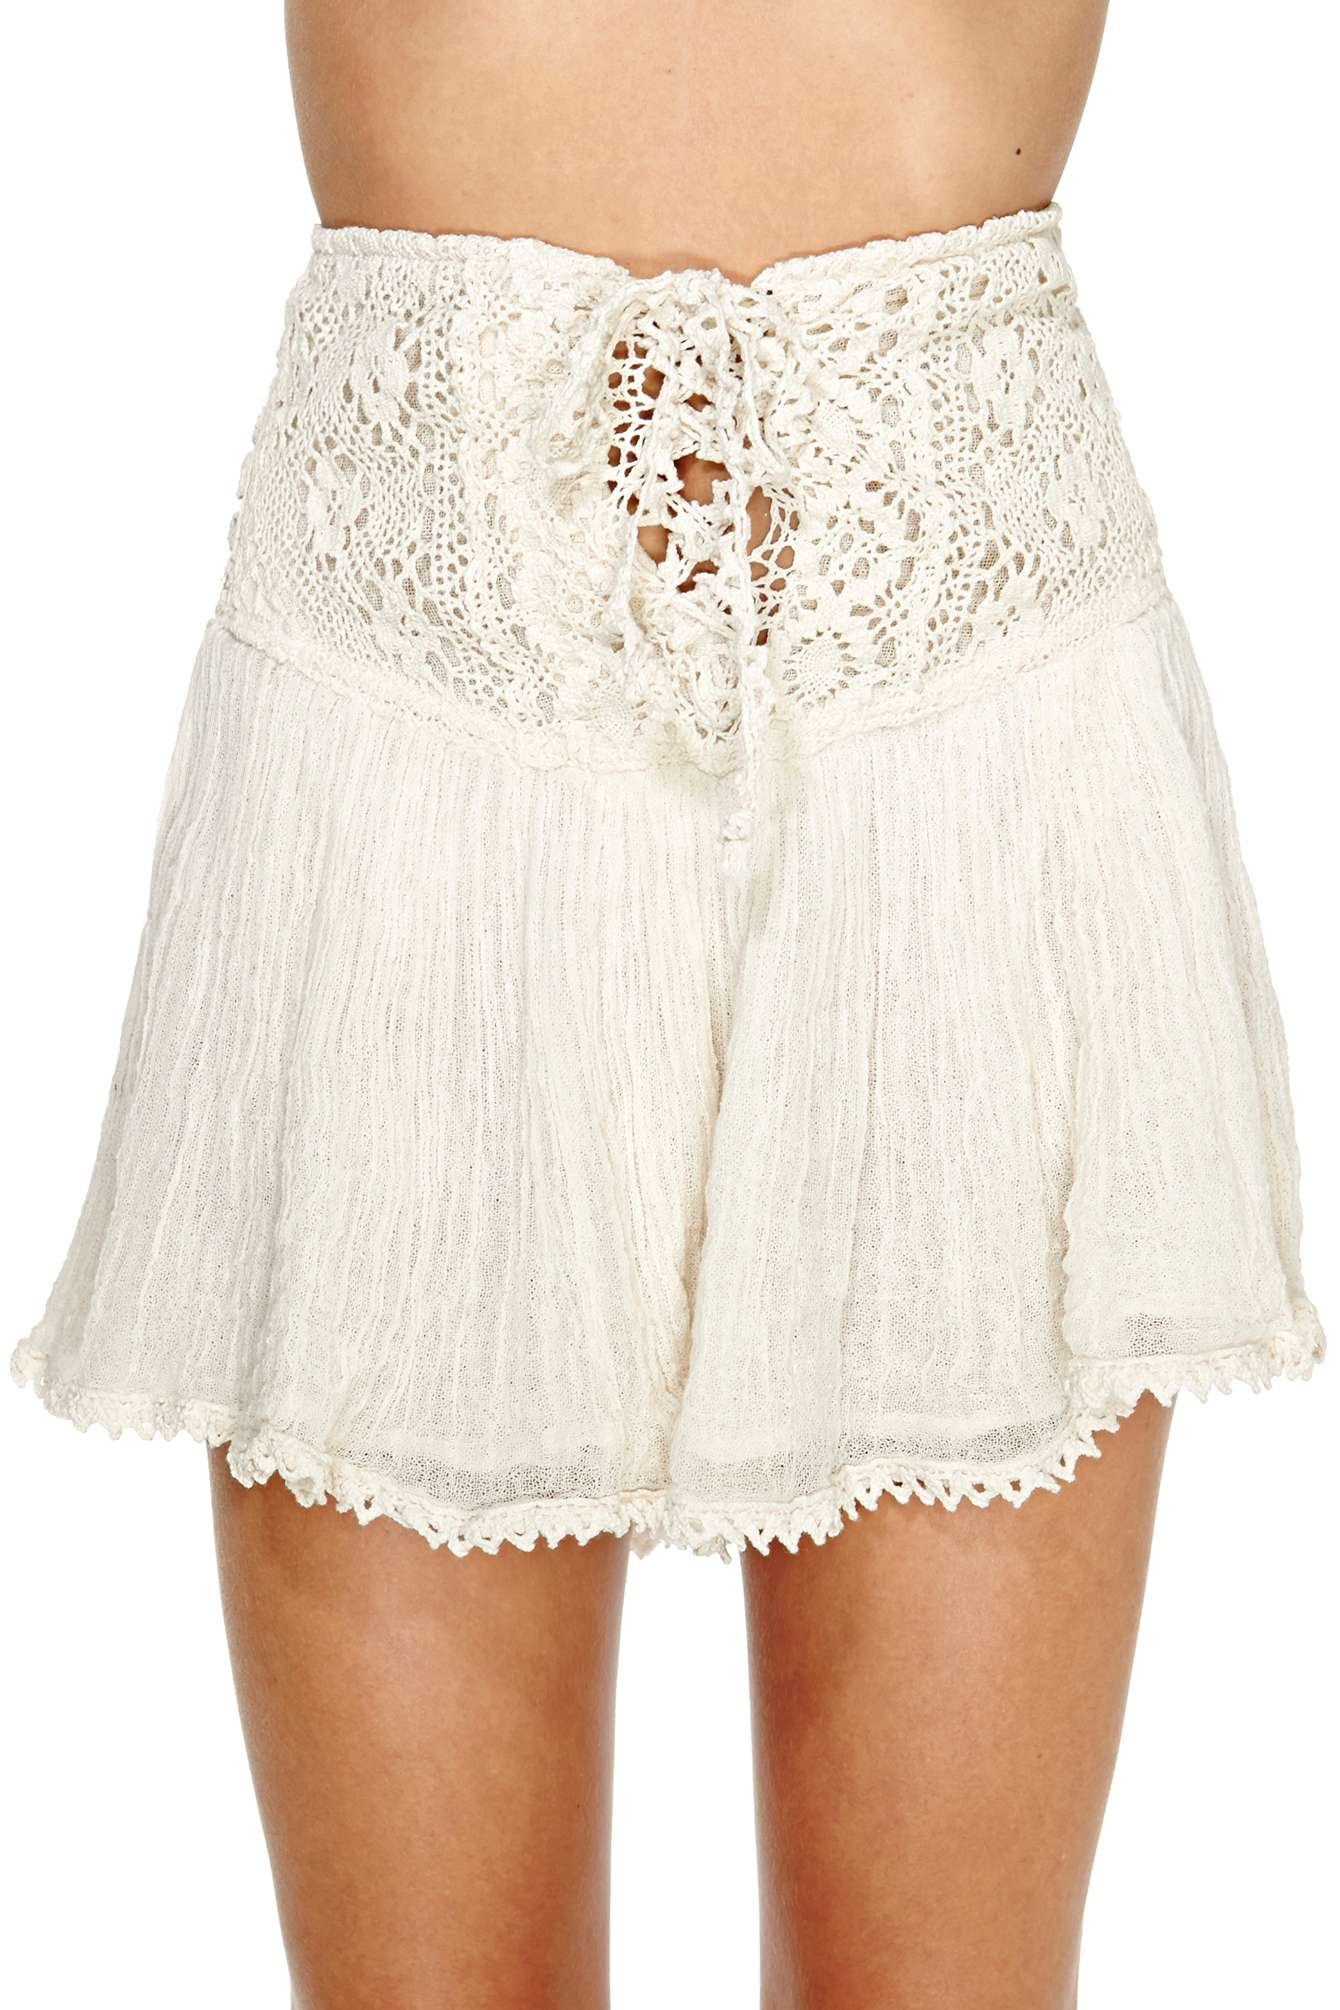 Nasty gal Jens Pirate Booty Wisteria Corset Skirt in Natural | Lyst